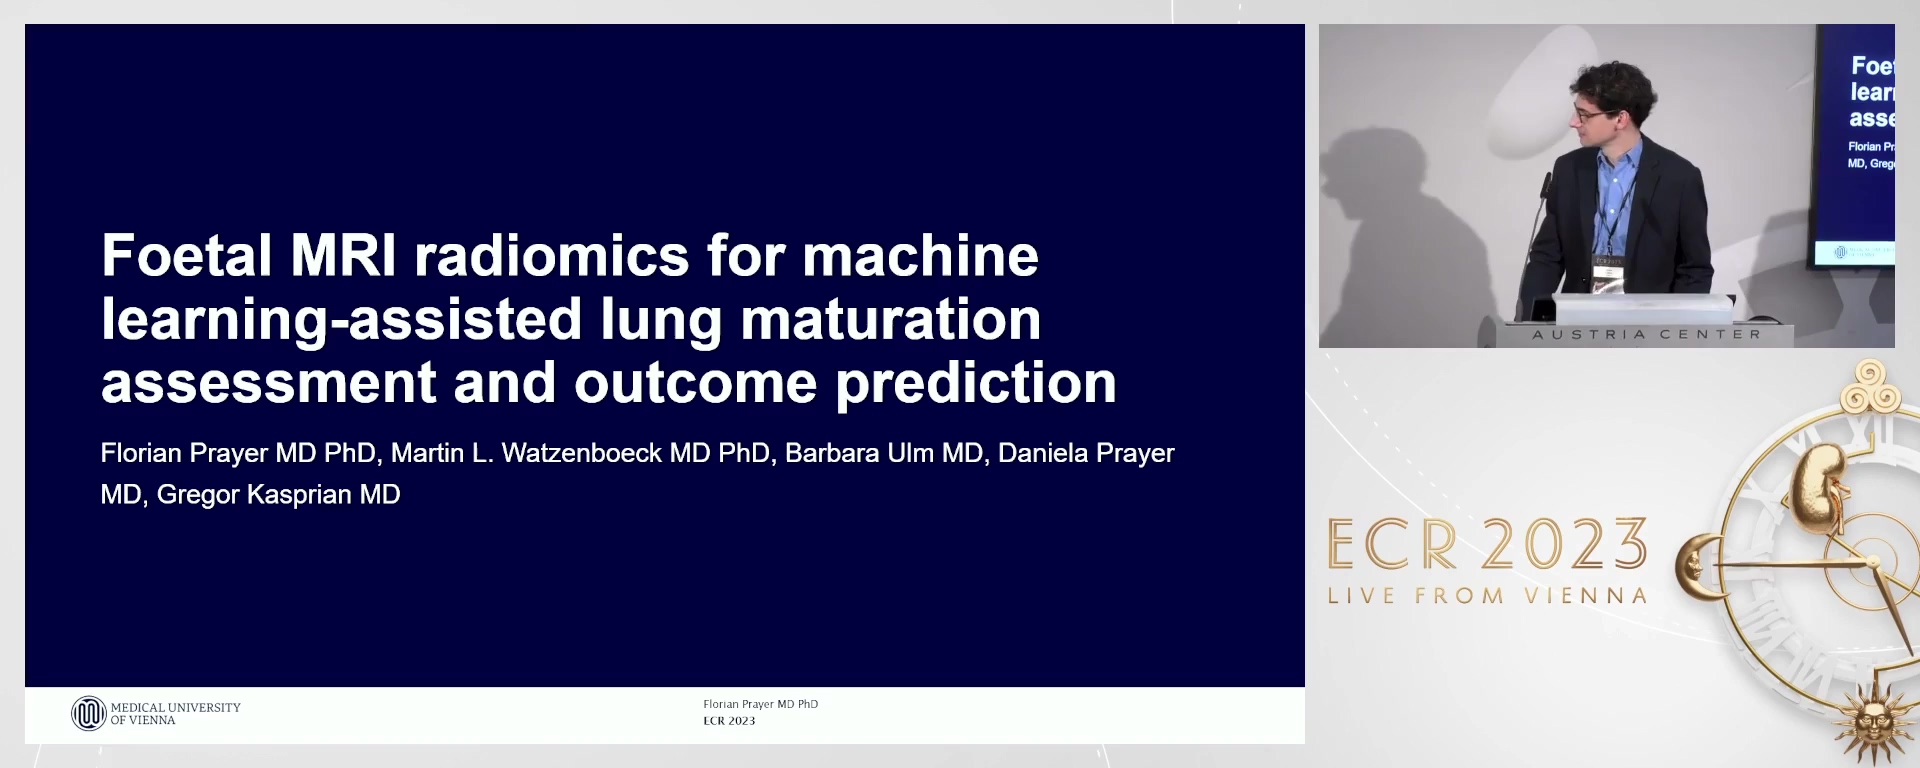 Foetal MRI radiomics for machine learning-assisted lung maturation assessment and outcome prediction - Florian Prayer, Vienna / AT